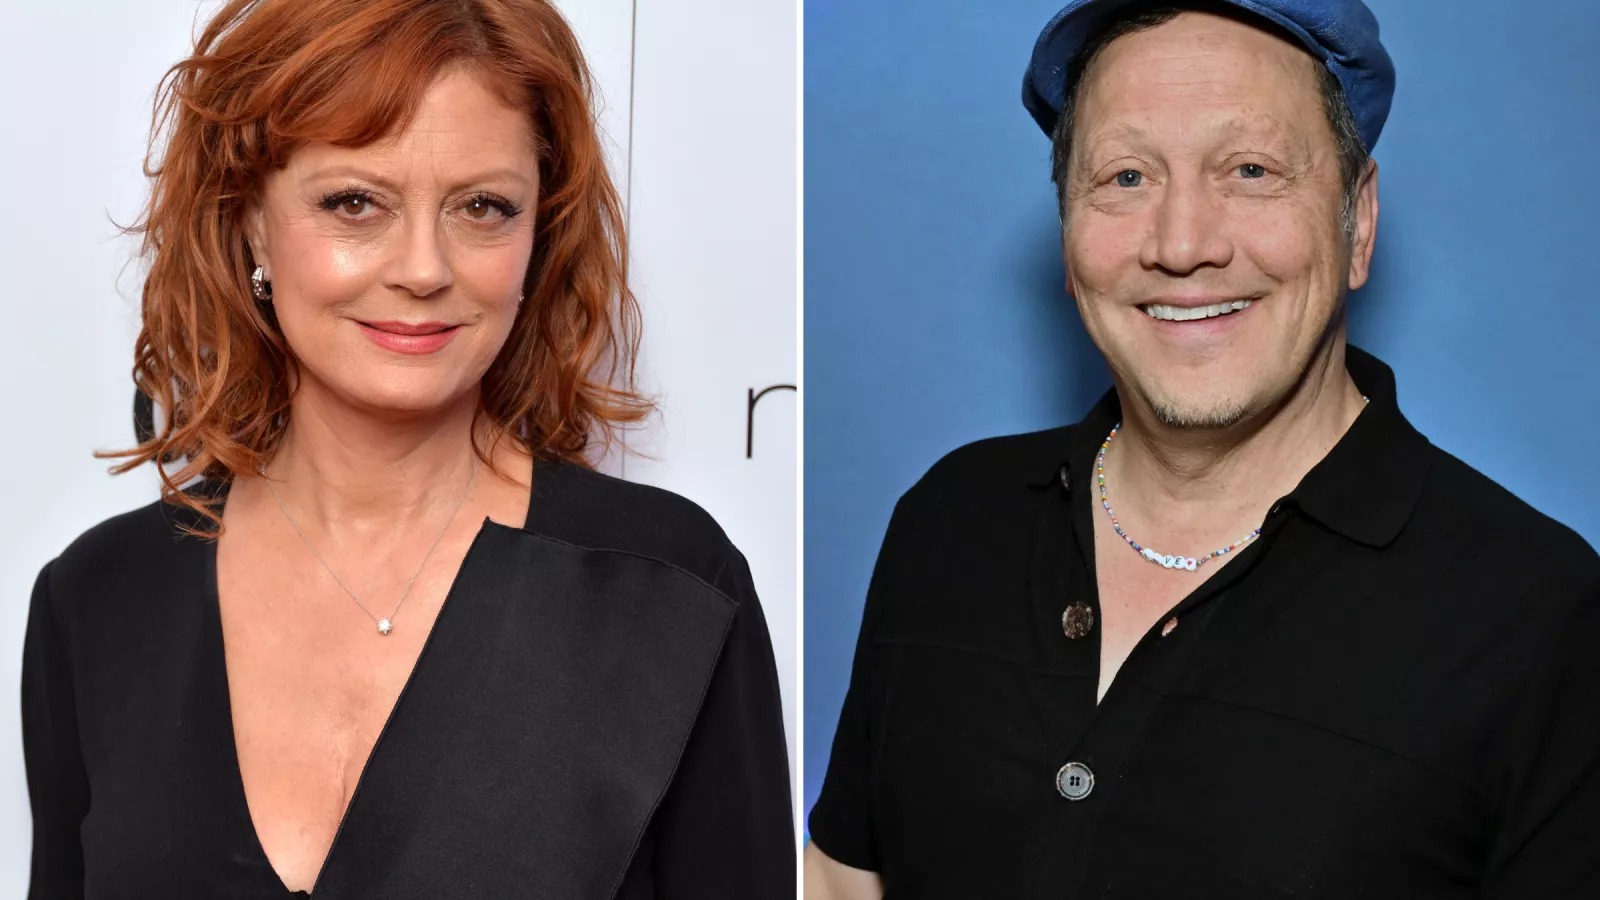 Where would 'Thelma & Louise' be now? Susan Sarandon weighs in